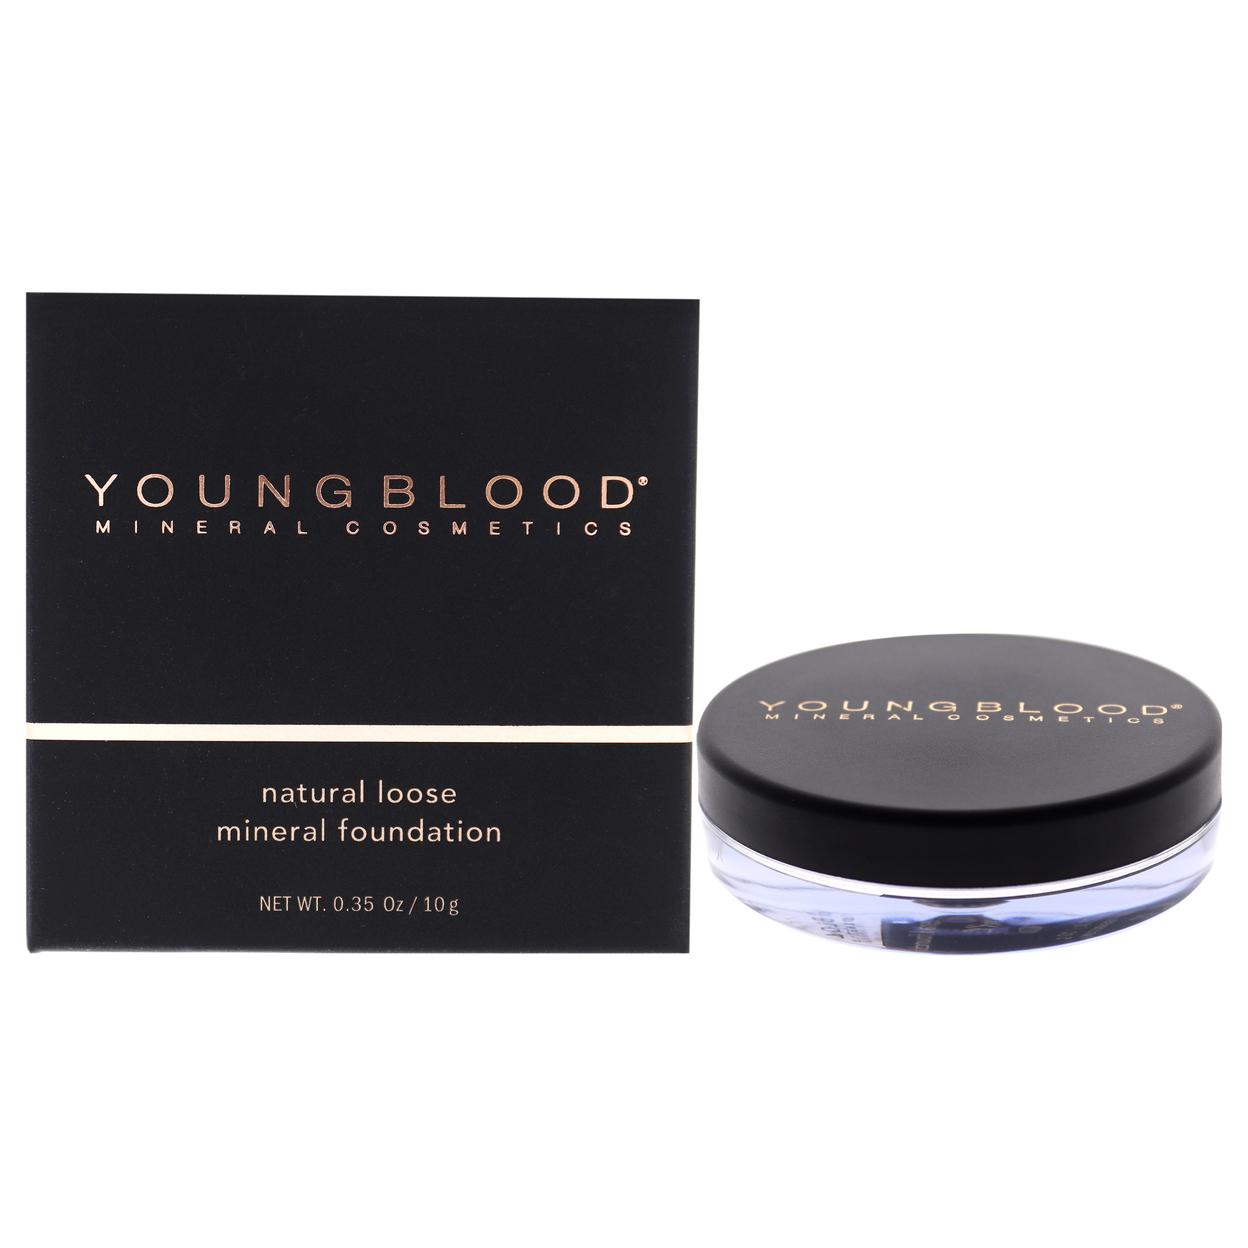 Youngblood Women COSMETIC Natural Loose Mineral Foundation - Ivory 0.35 Oz